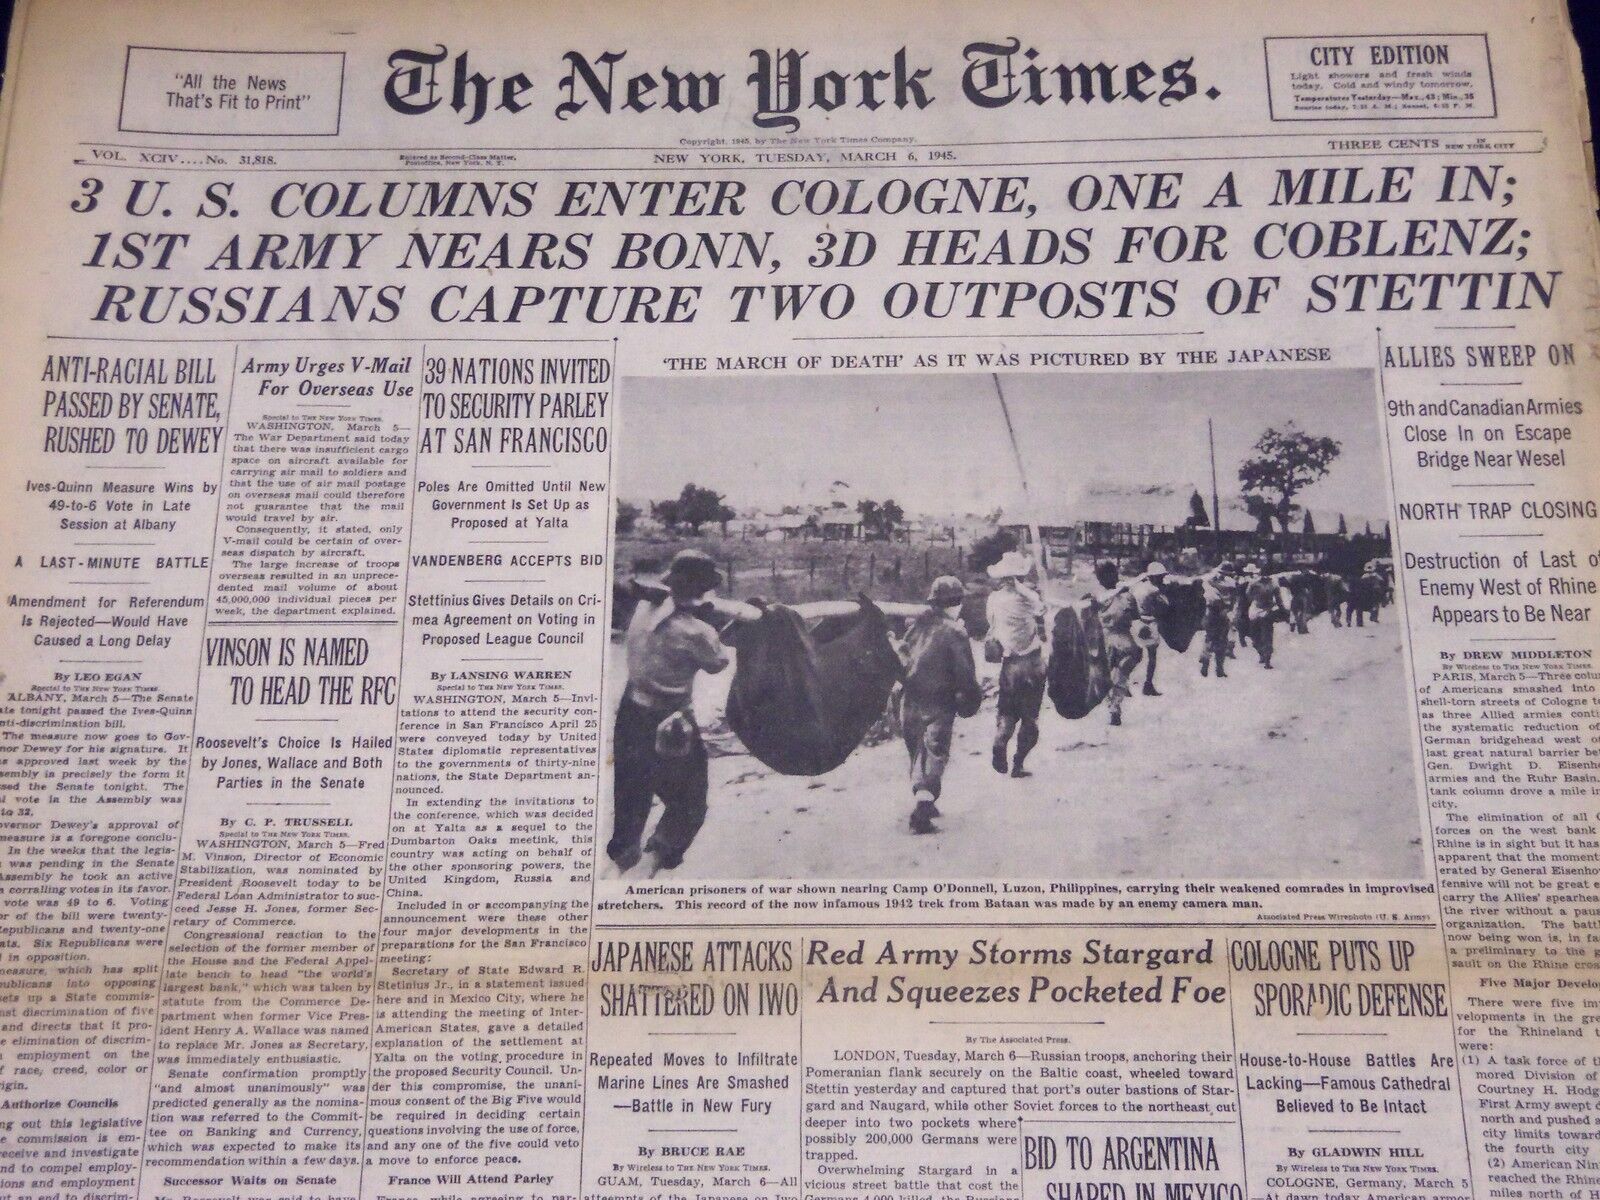 1945 MARCH 6 NEW YORK TIMES - 3 U. S. COLUMNS ENTER COLOGNE - NT 399